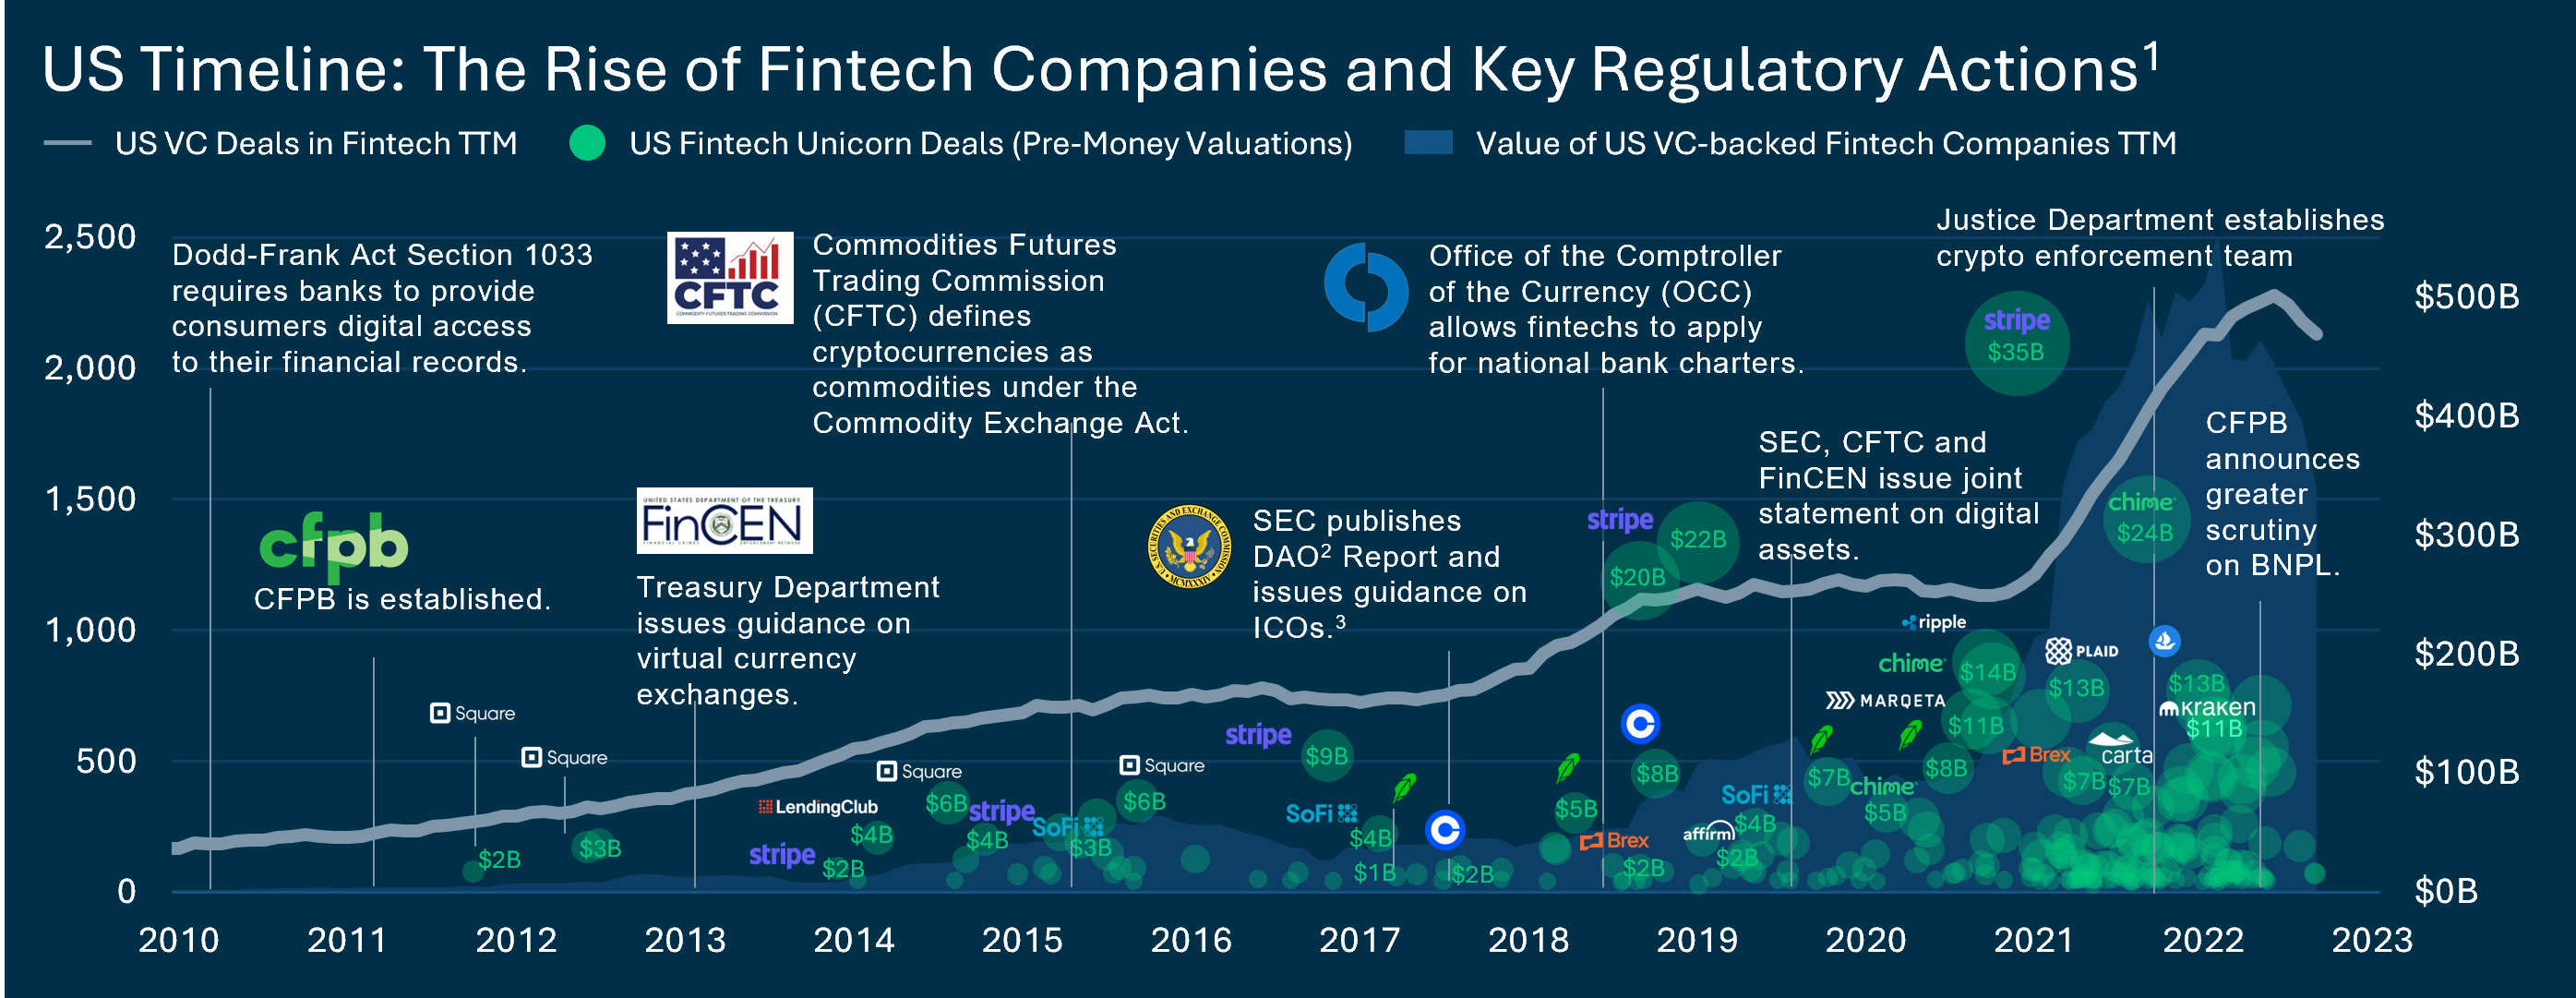 US Timeline The Rise of Fintech Companies